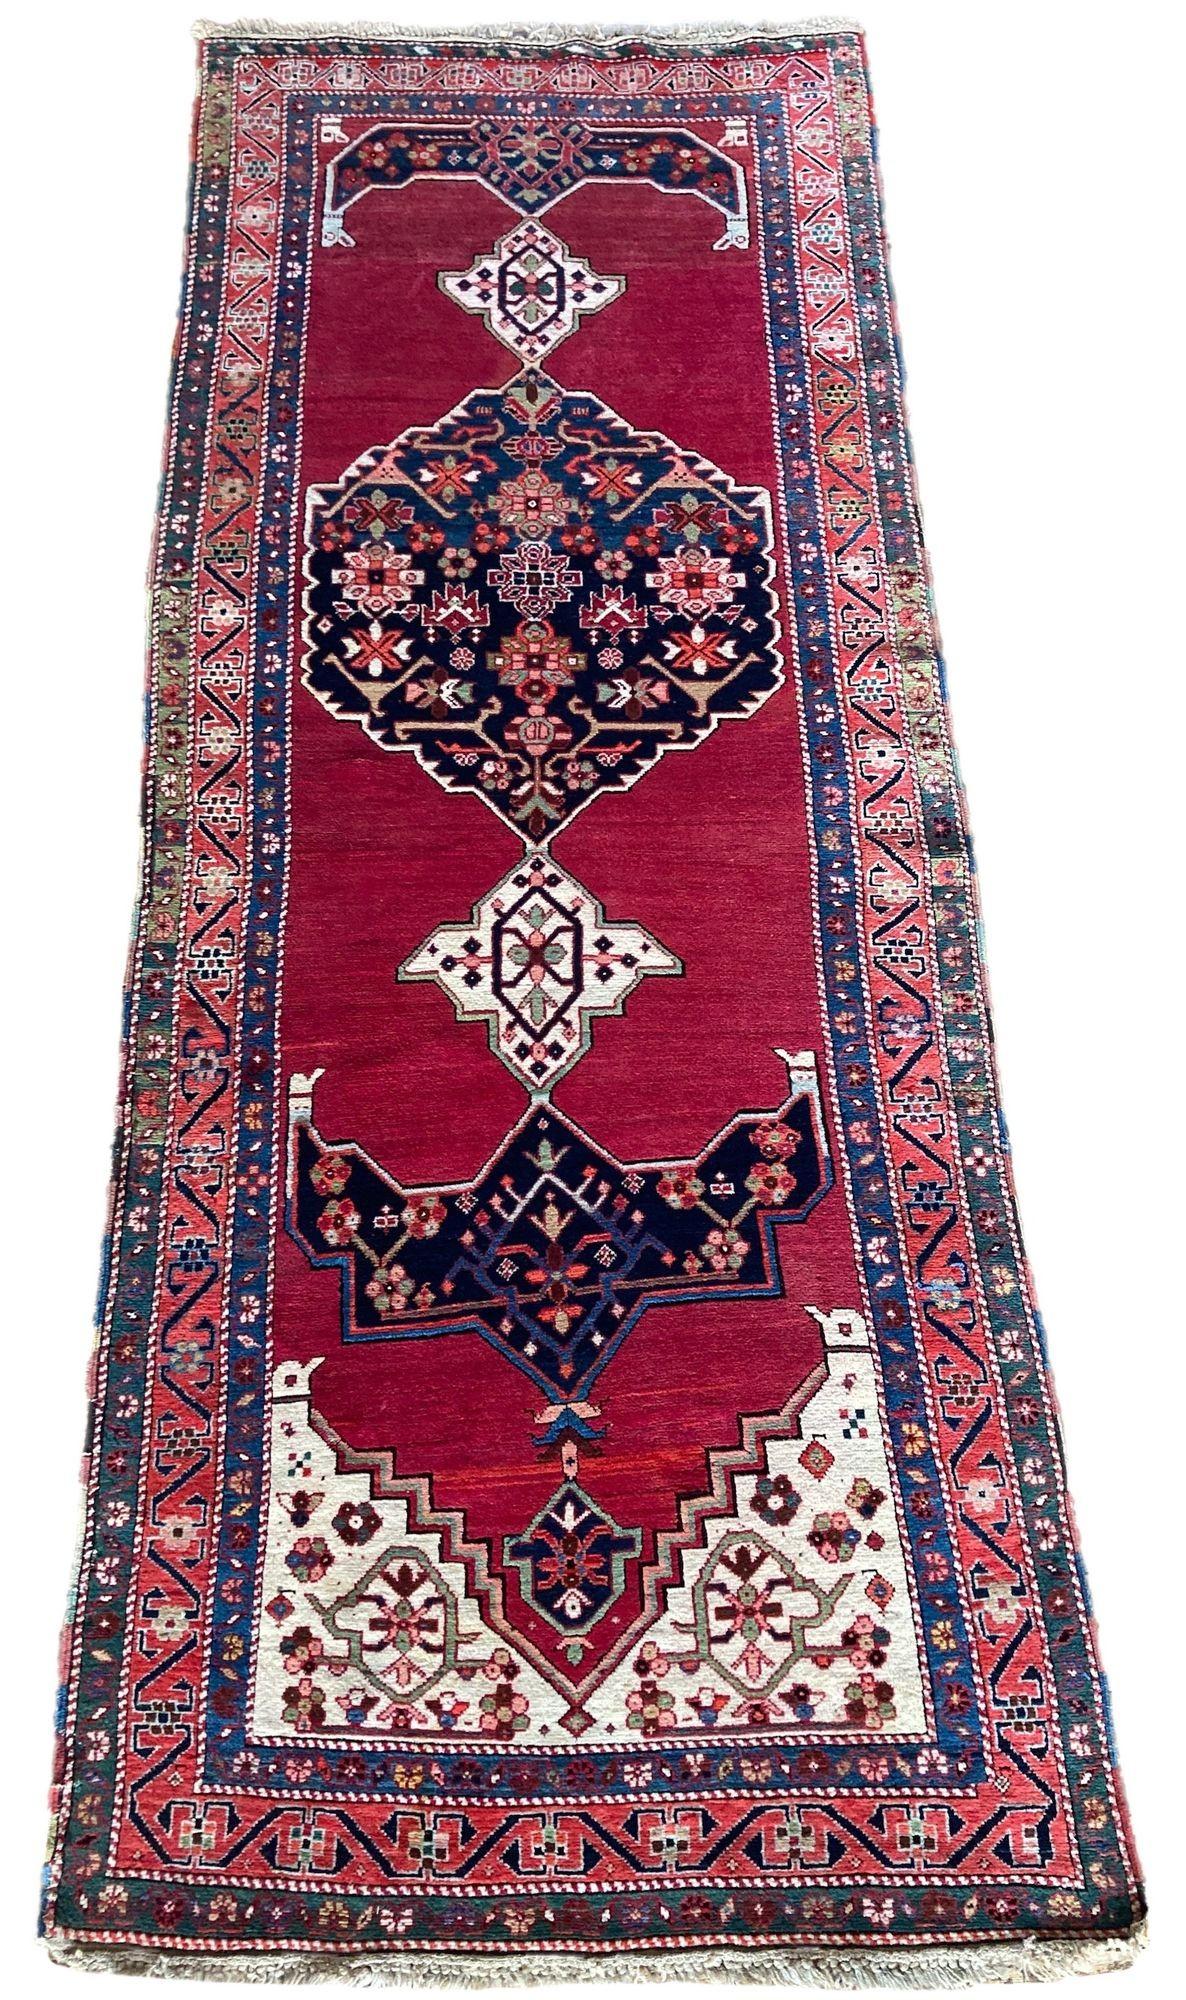 A fabulous antique Karabagh rug, handwoven in the southern Caucasus mountains of modern day Azerbaijan circa 1900. The design features an offset medallion on an open red field and terracotta border. Lovely secondary colours including a beautiful